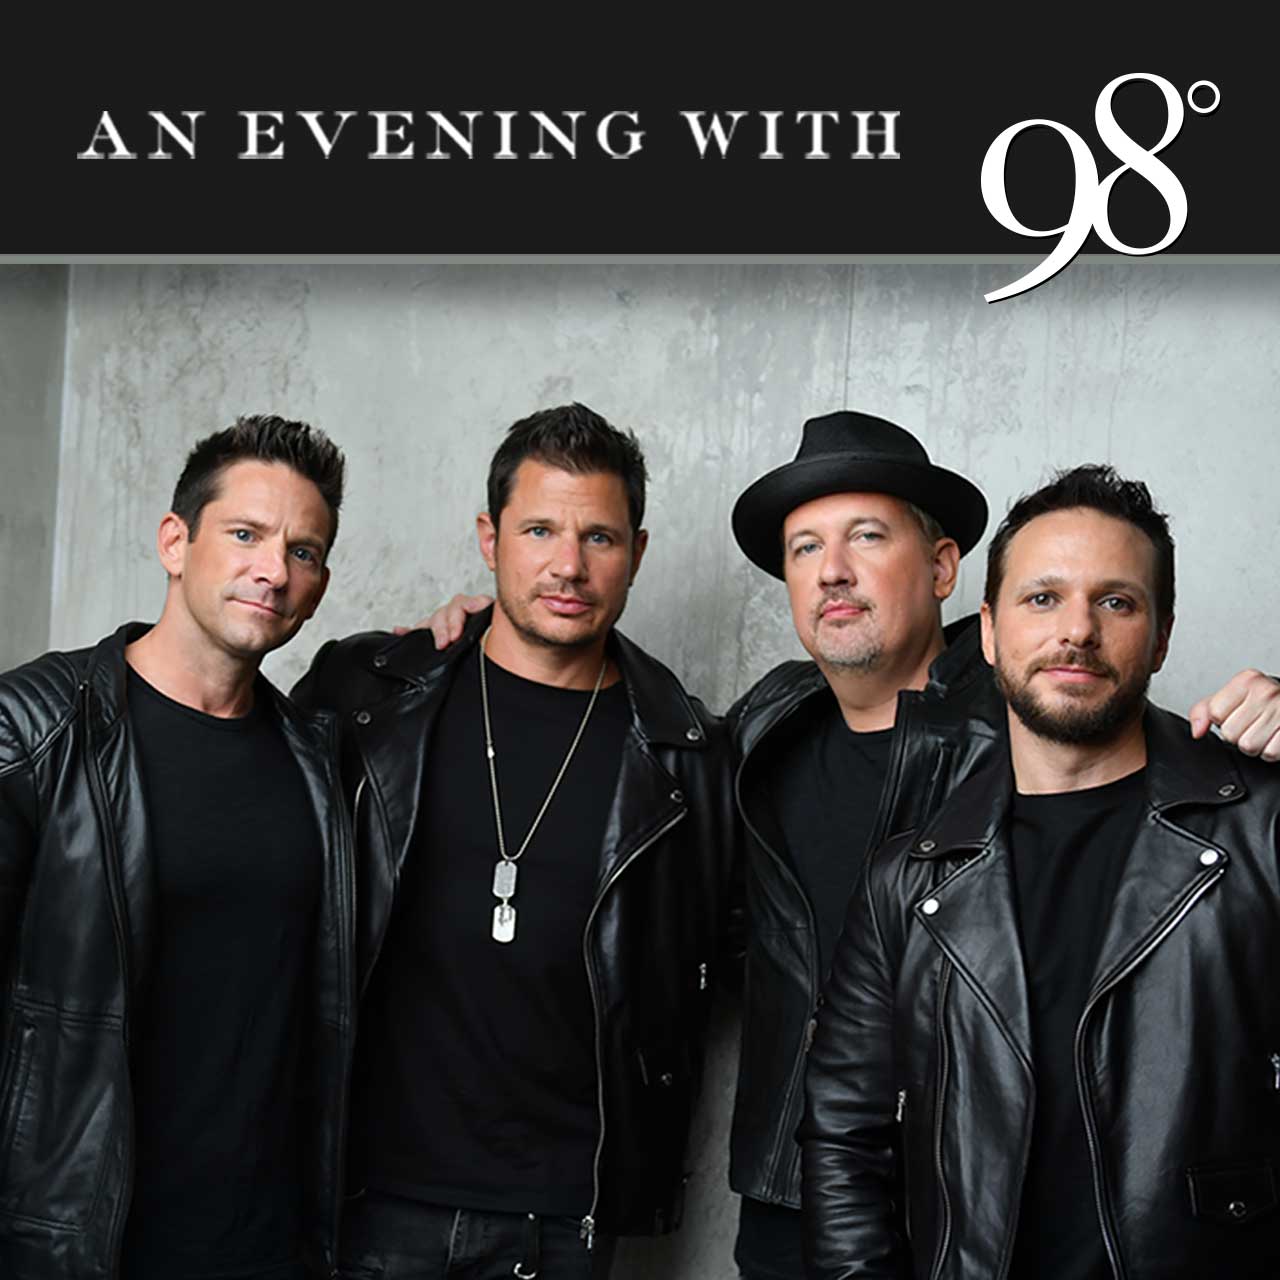 98 Degrees - Presales start tomorrow! Use the presale code 98christmas to  get early access to tickets. All dates and info on 98degrees.com